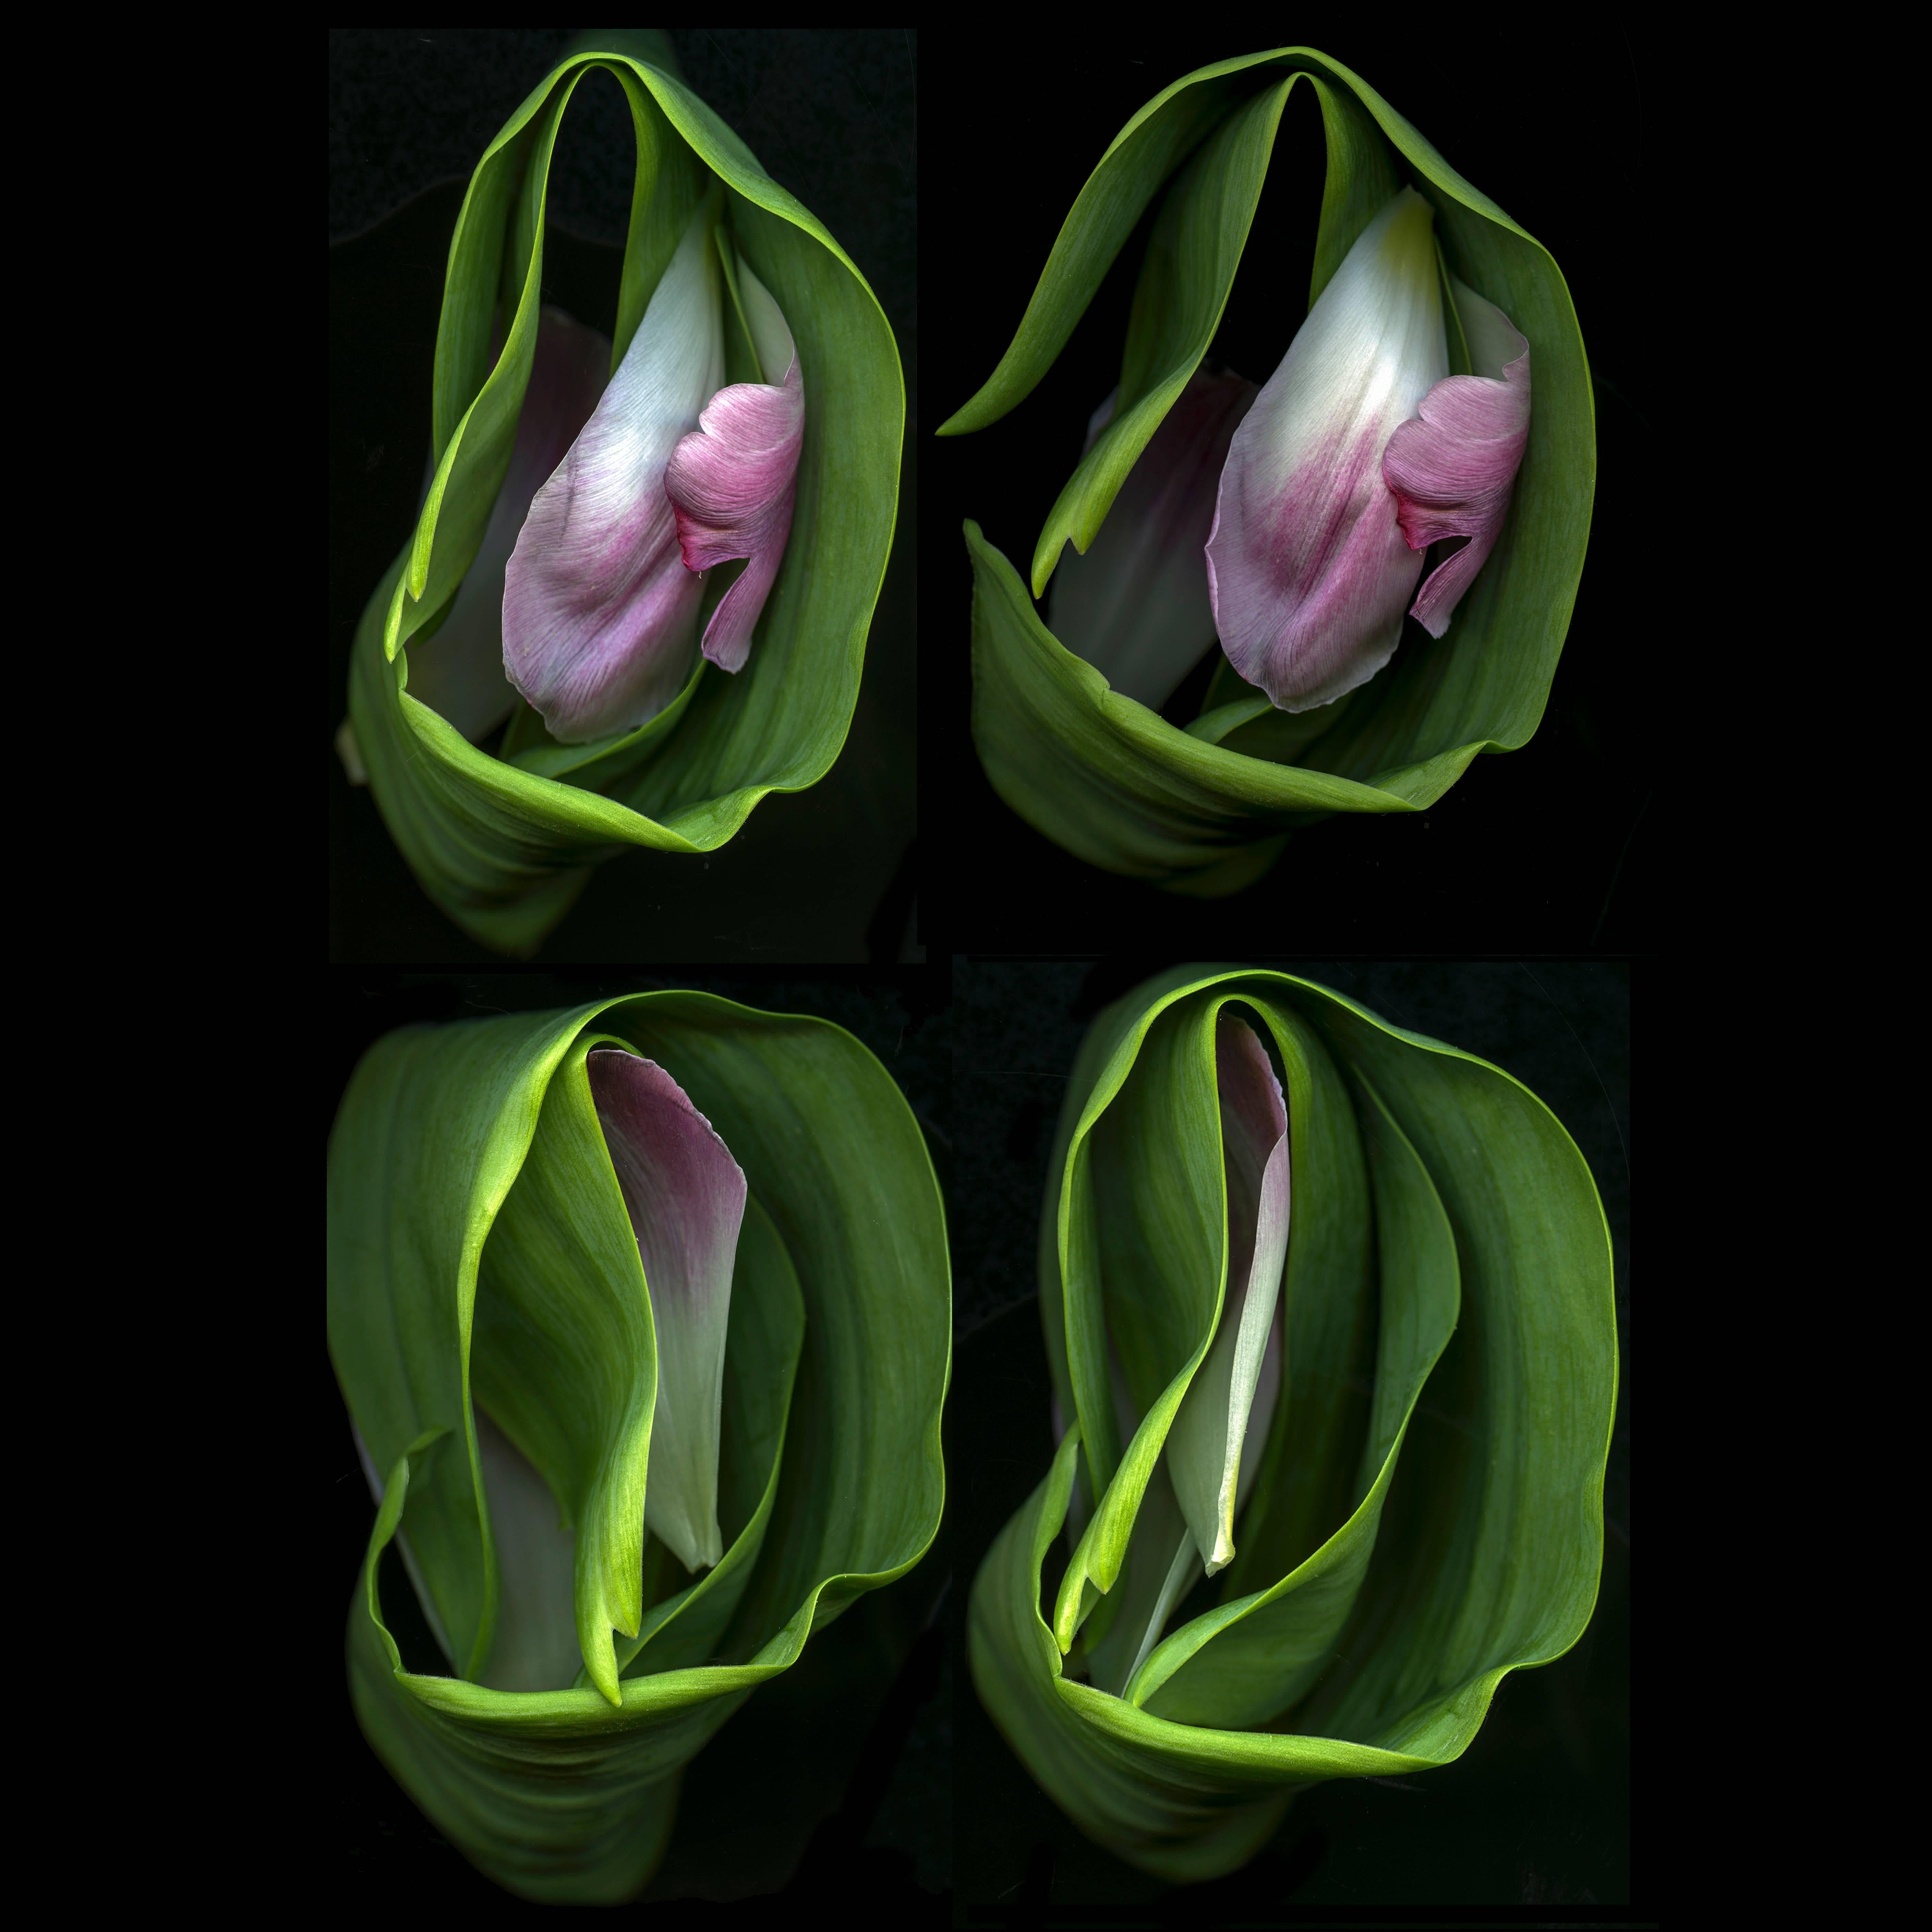 Tulip Wraps (Modern Floral Still Life Photo of Pink & Green Tulip Flowers)